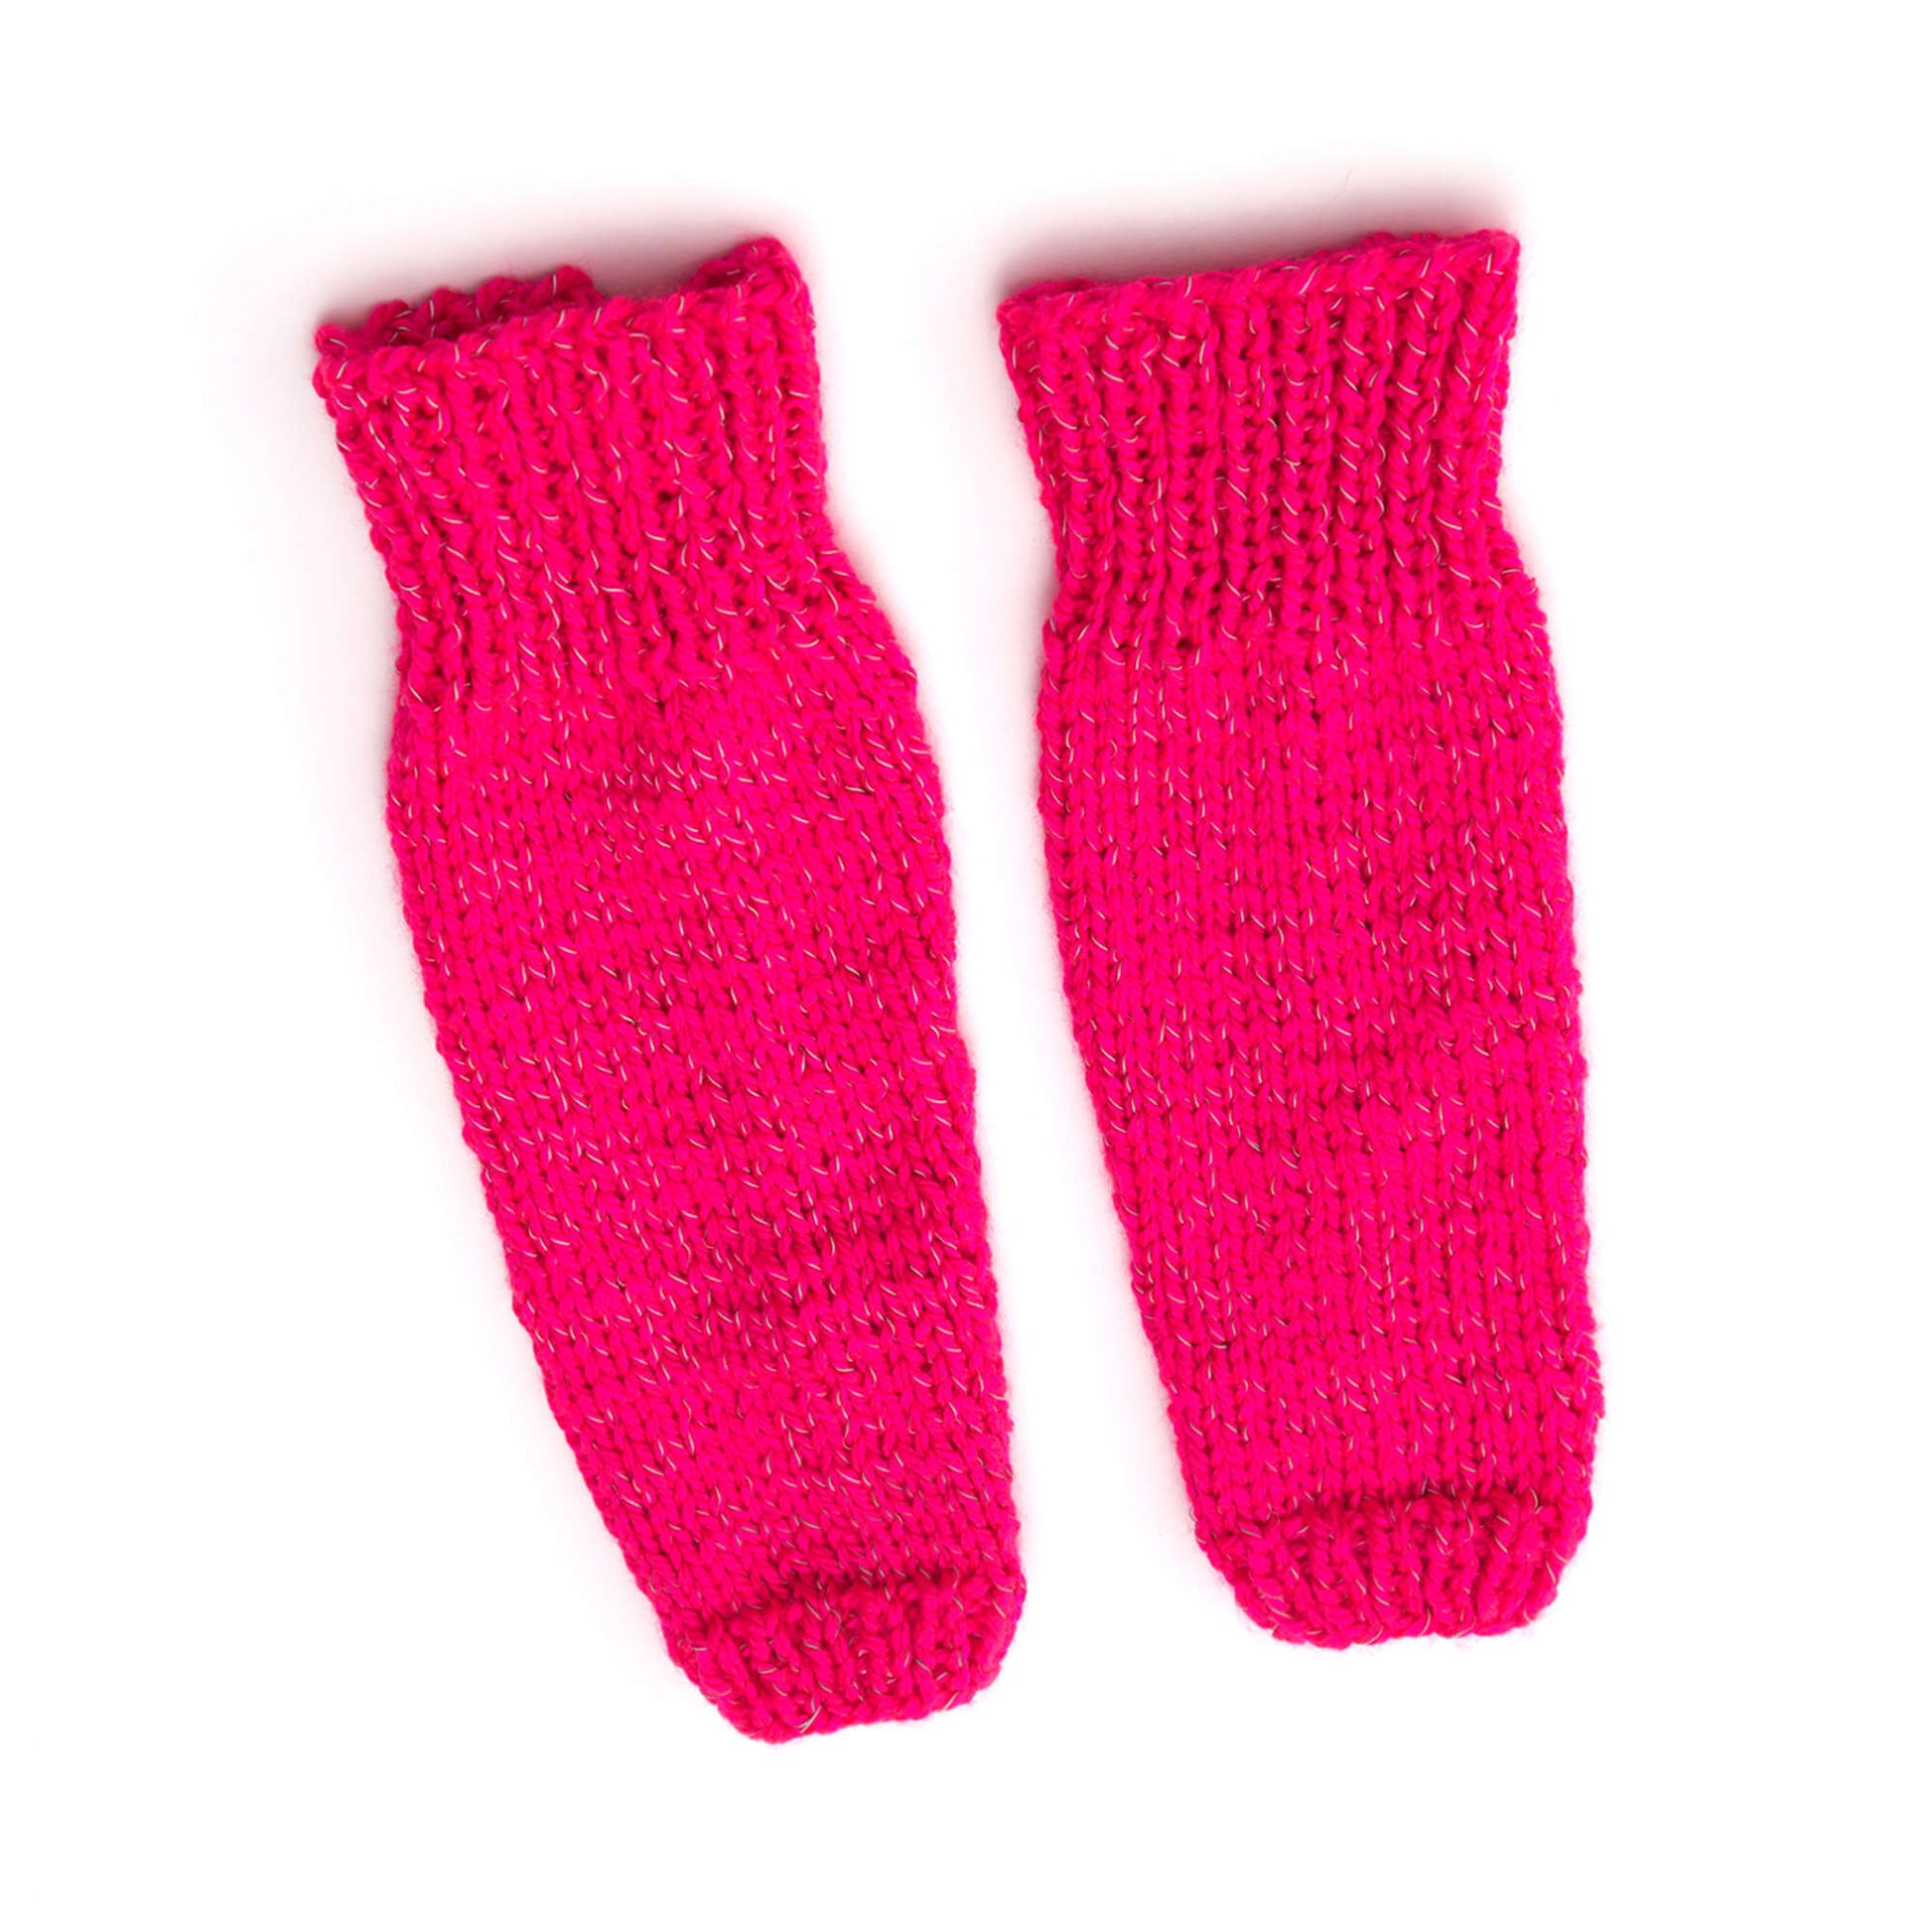 Free Red Heart Kid's Legwarmers with Flash Knit Pattern